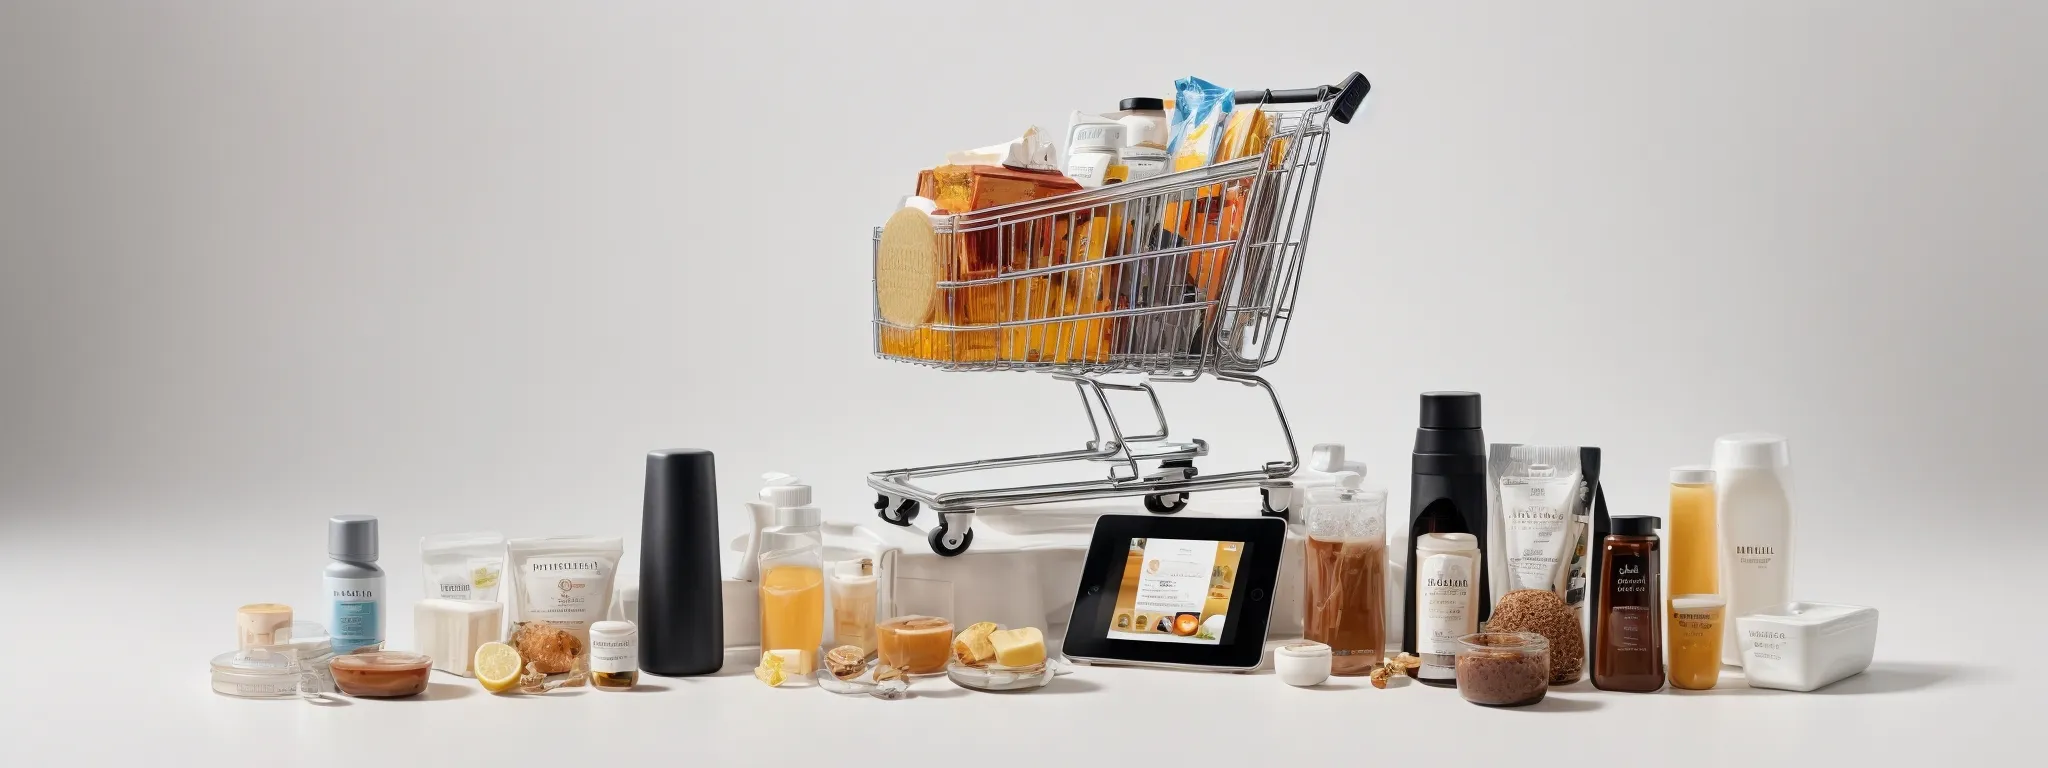 a shopping cart filled with various products placed against the backdrop of a digital tablet displaying an online store's webpage.